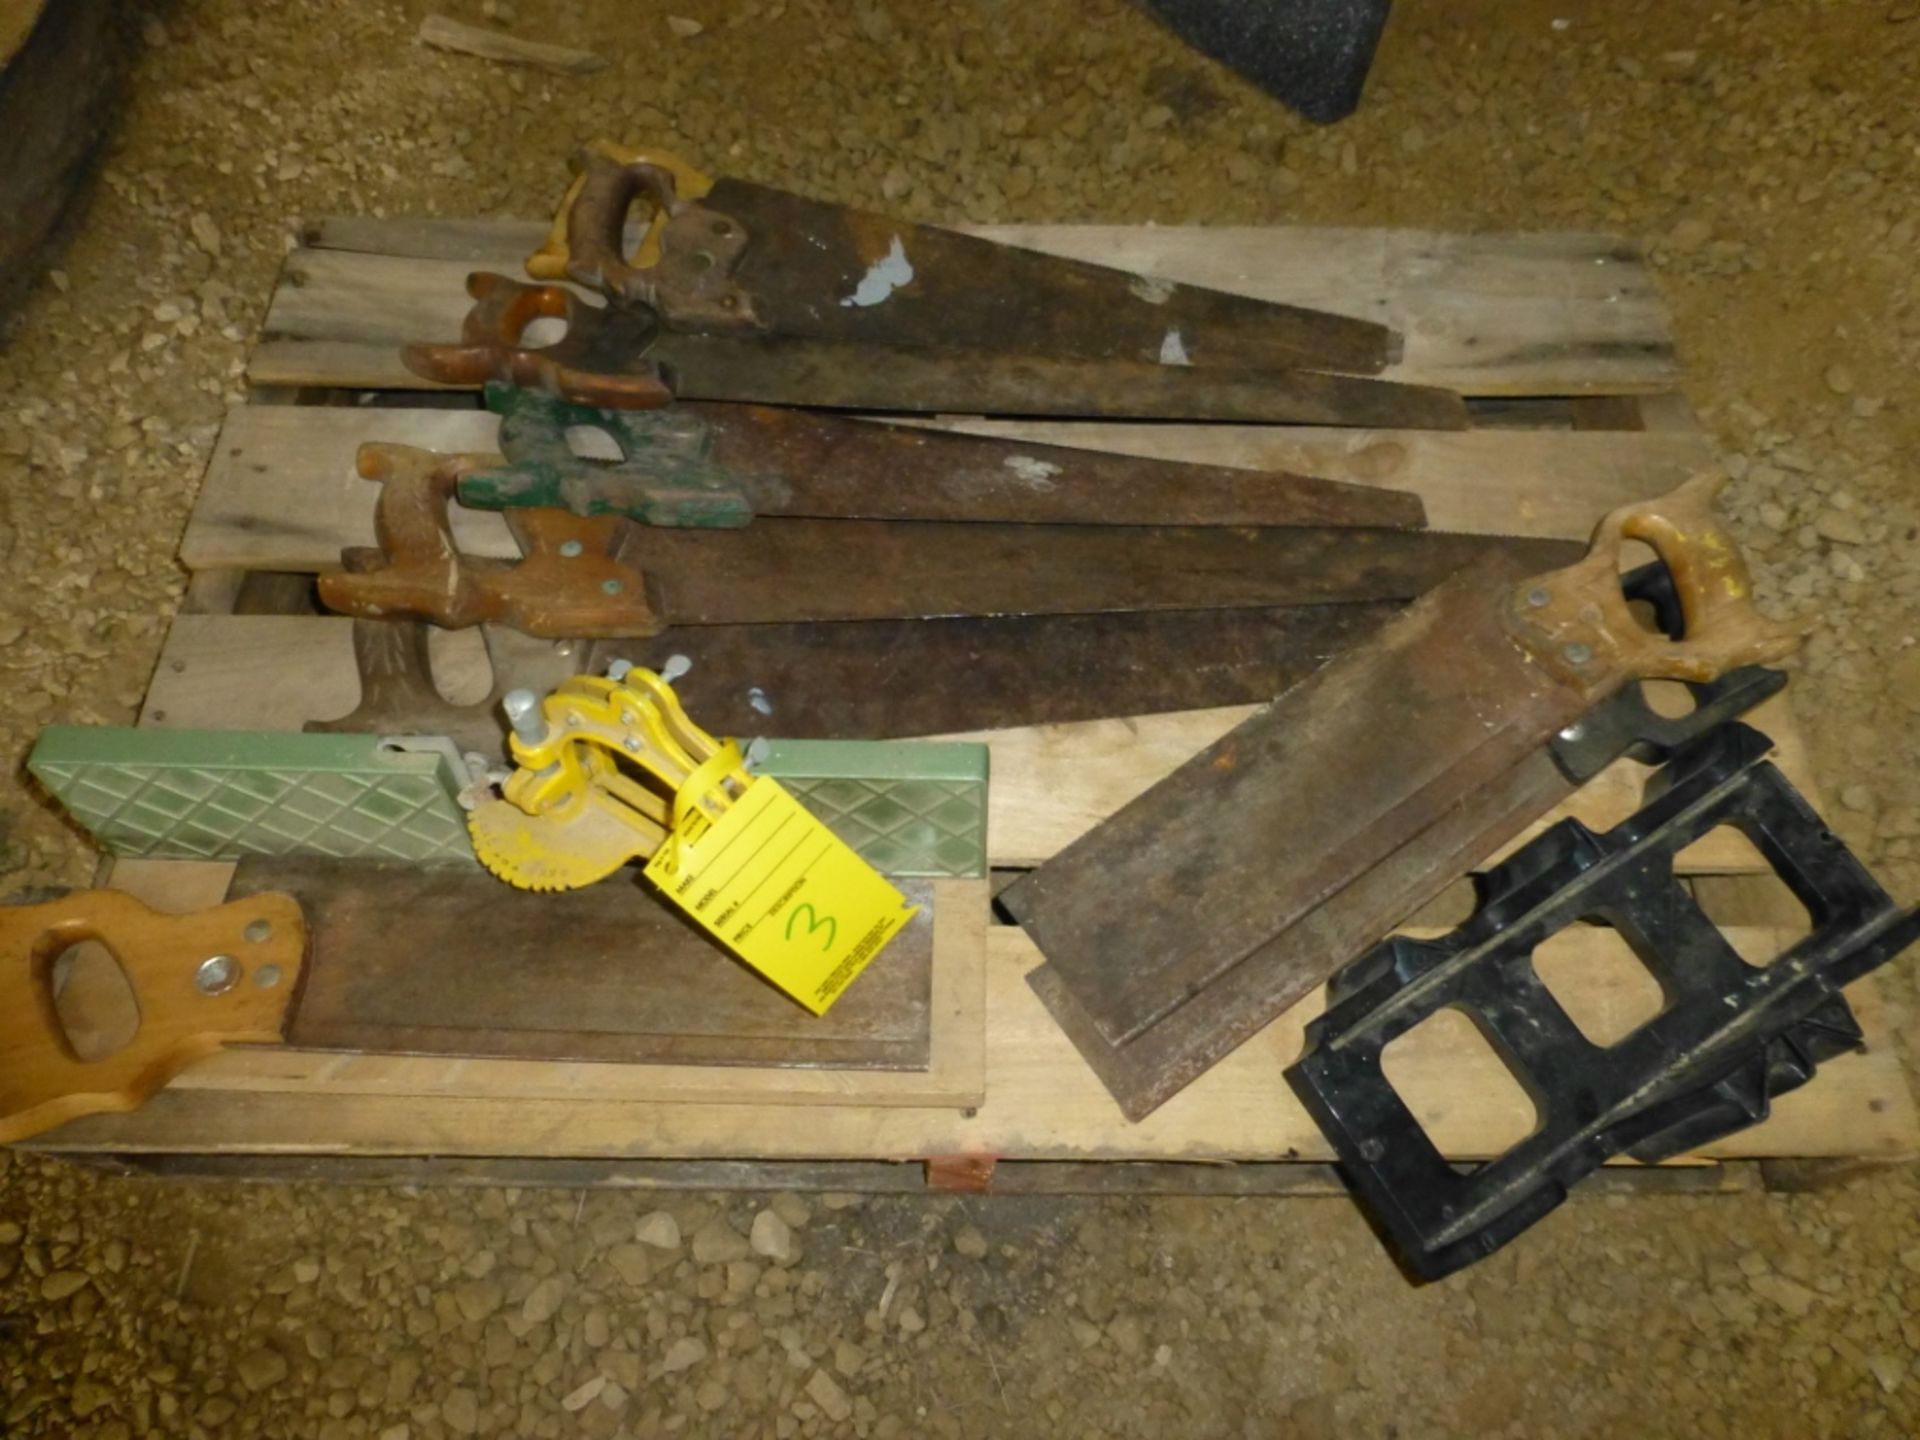 Assortments of hand saws and miter saw